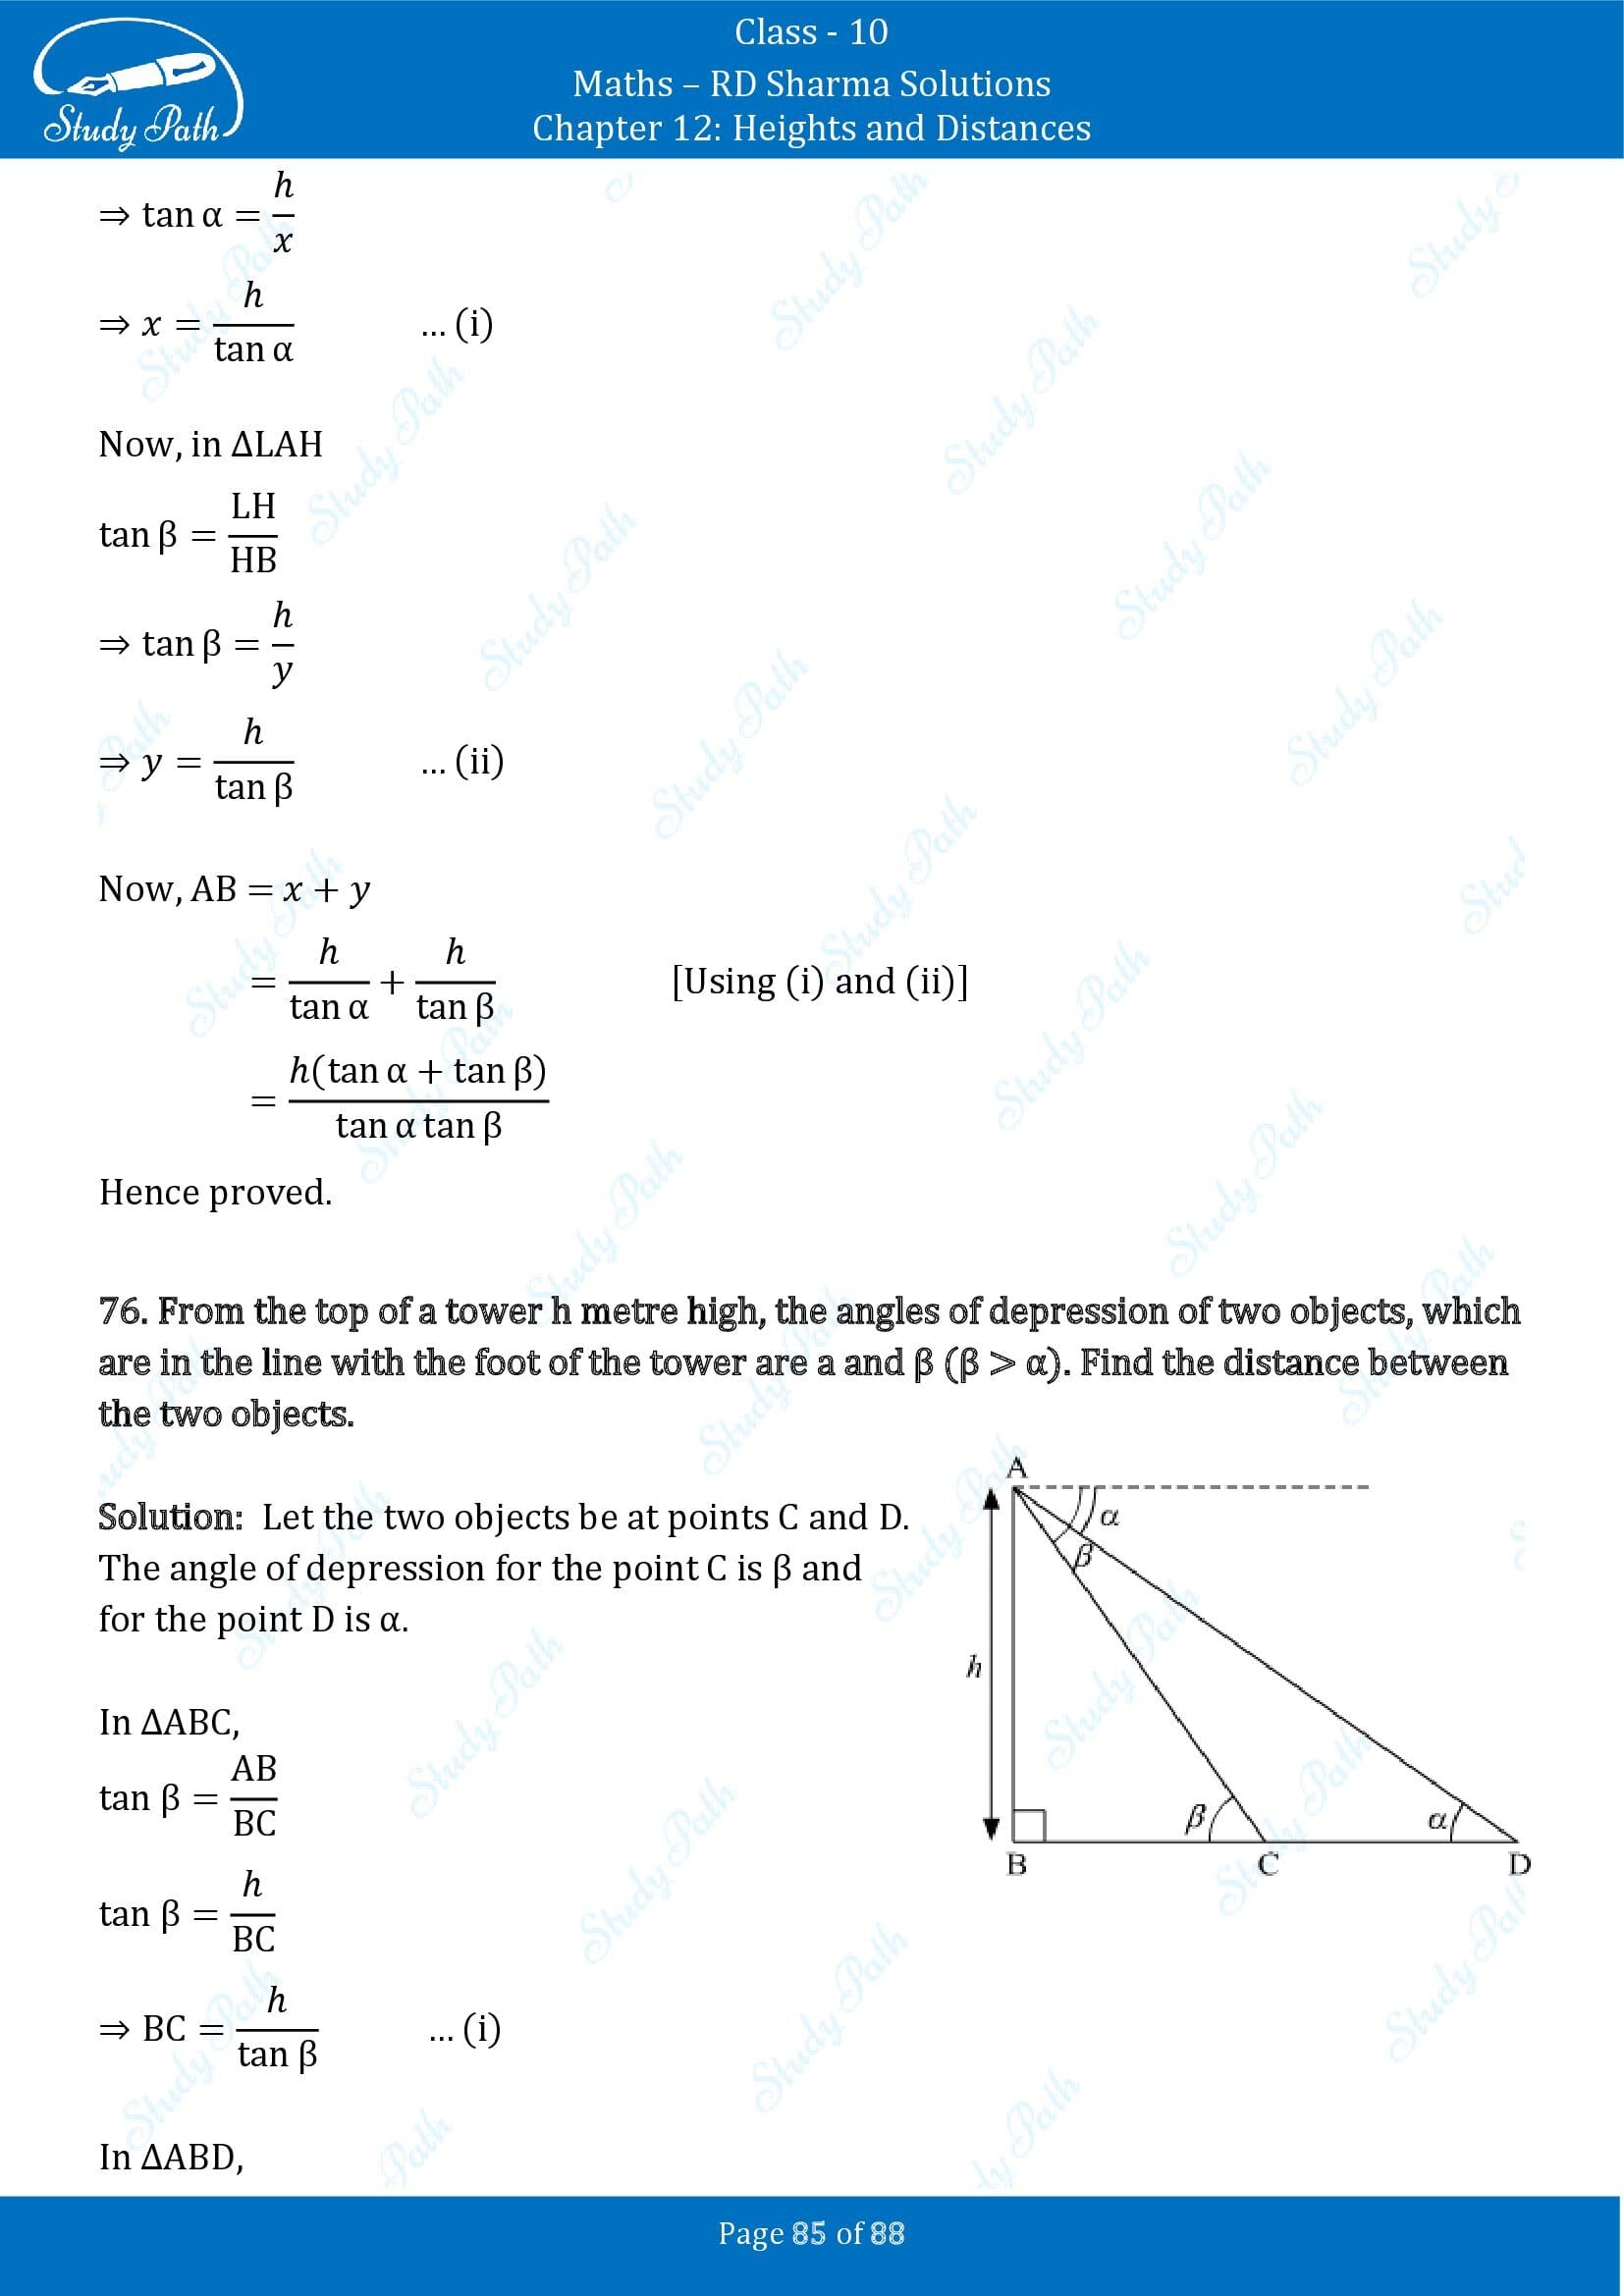 RD Sharma Solutions Class 10 Chapter 12 Heights and Distances Exercise 12.1 00085